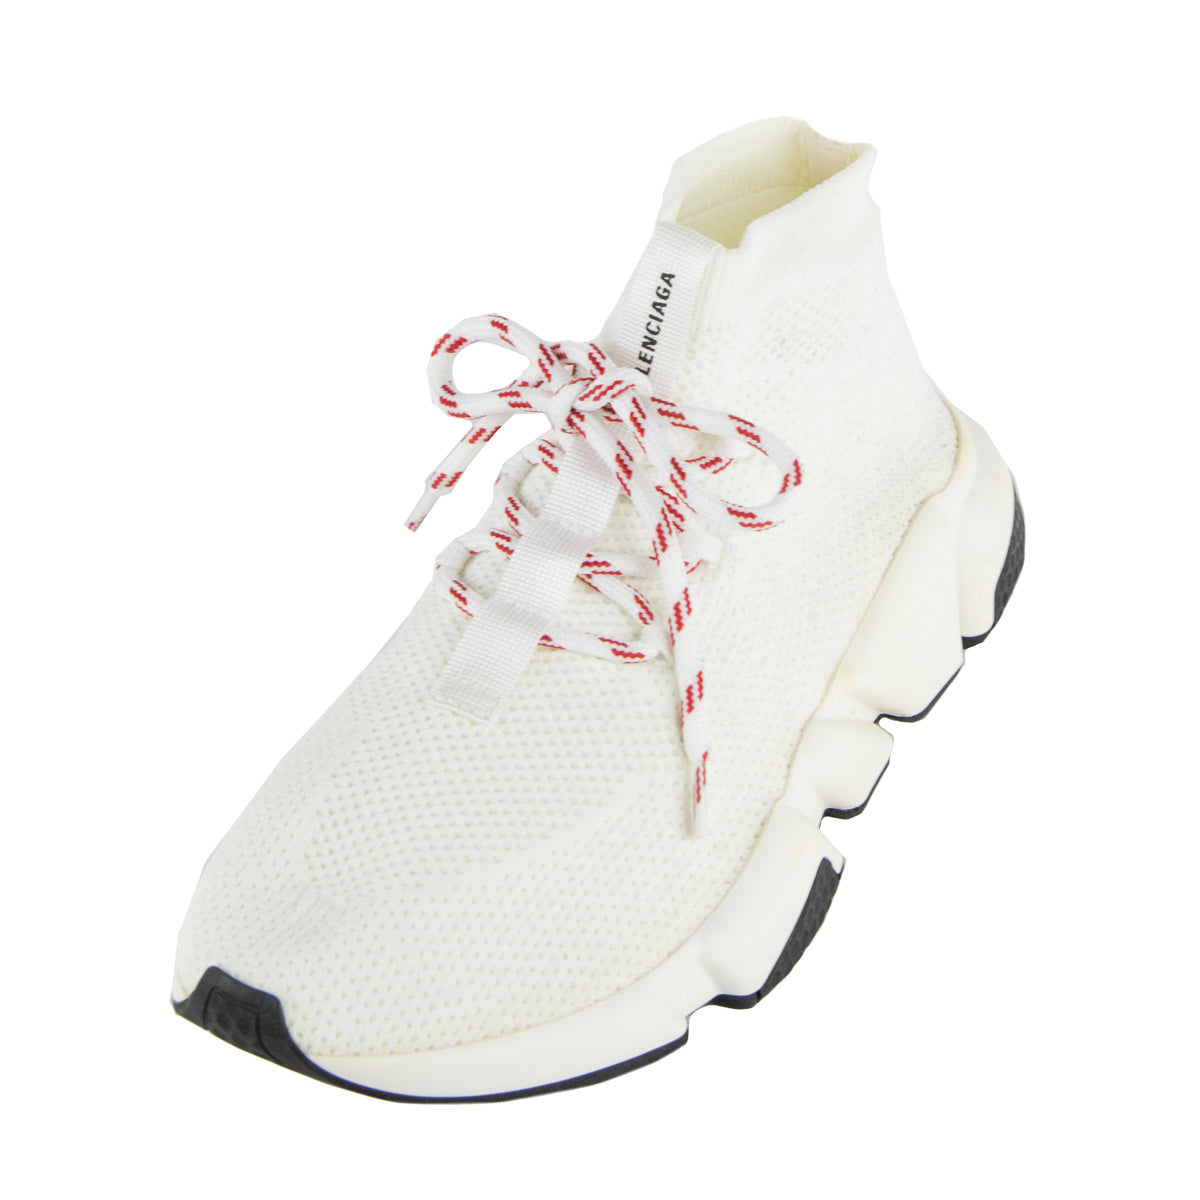 Balenciaga White Lace Up Speed Trainer Sock Sneakers Size US 9 | EU 39 - Love that Bag etc - Preowned Authentic Designer Handbags & Preloved Fashions